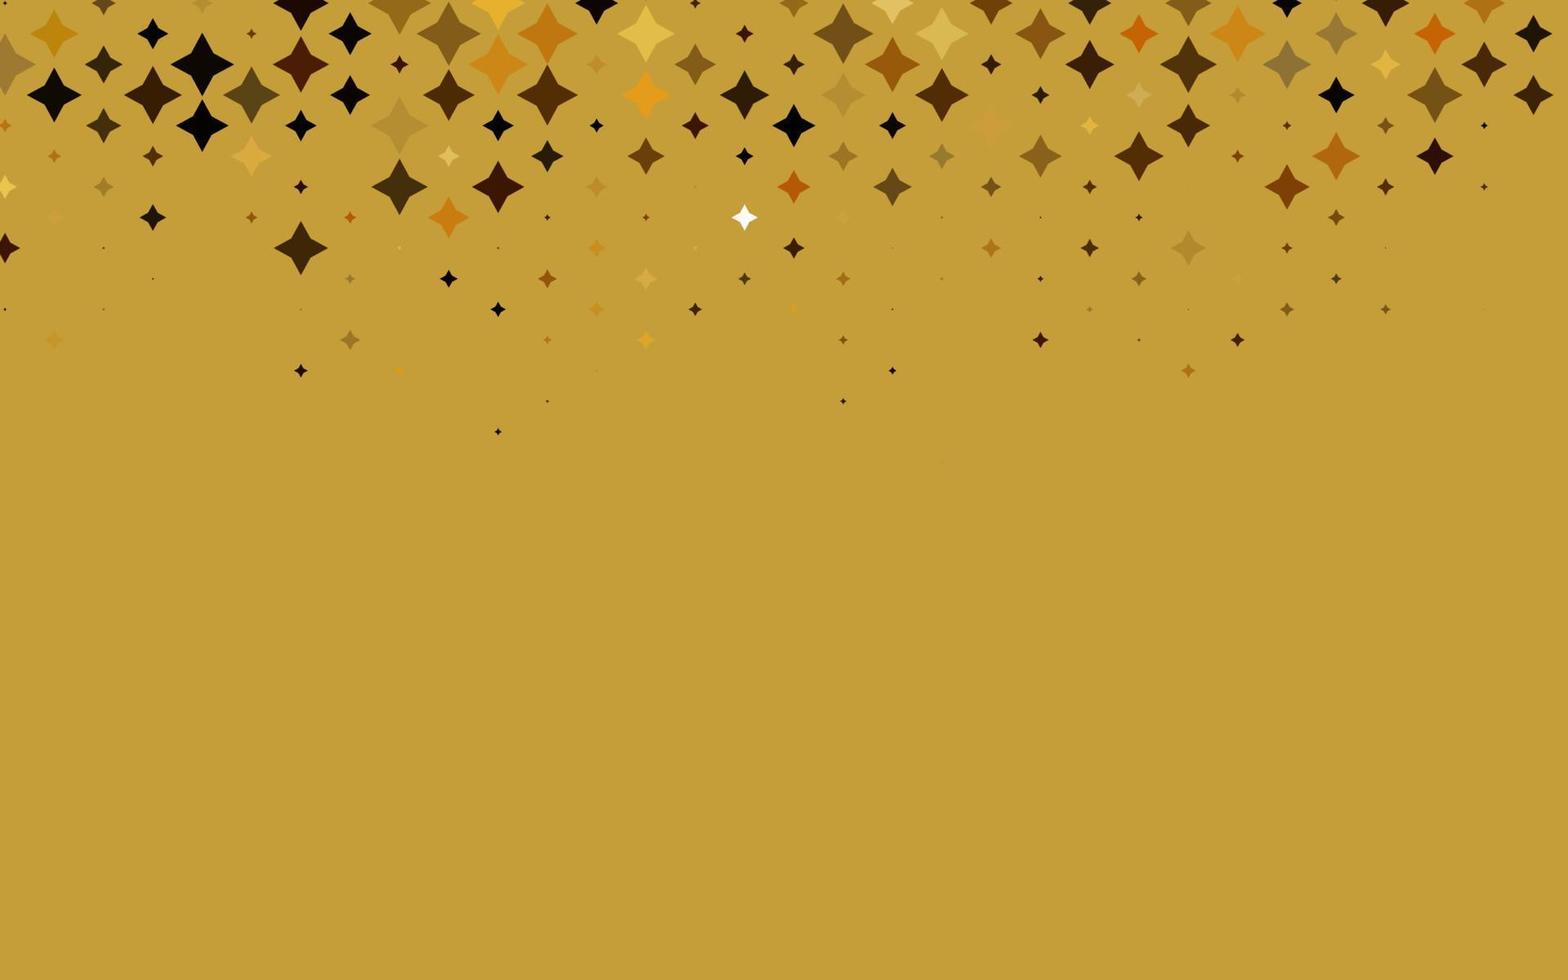 Light Yellow, Orange vector background with colored stars.